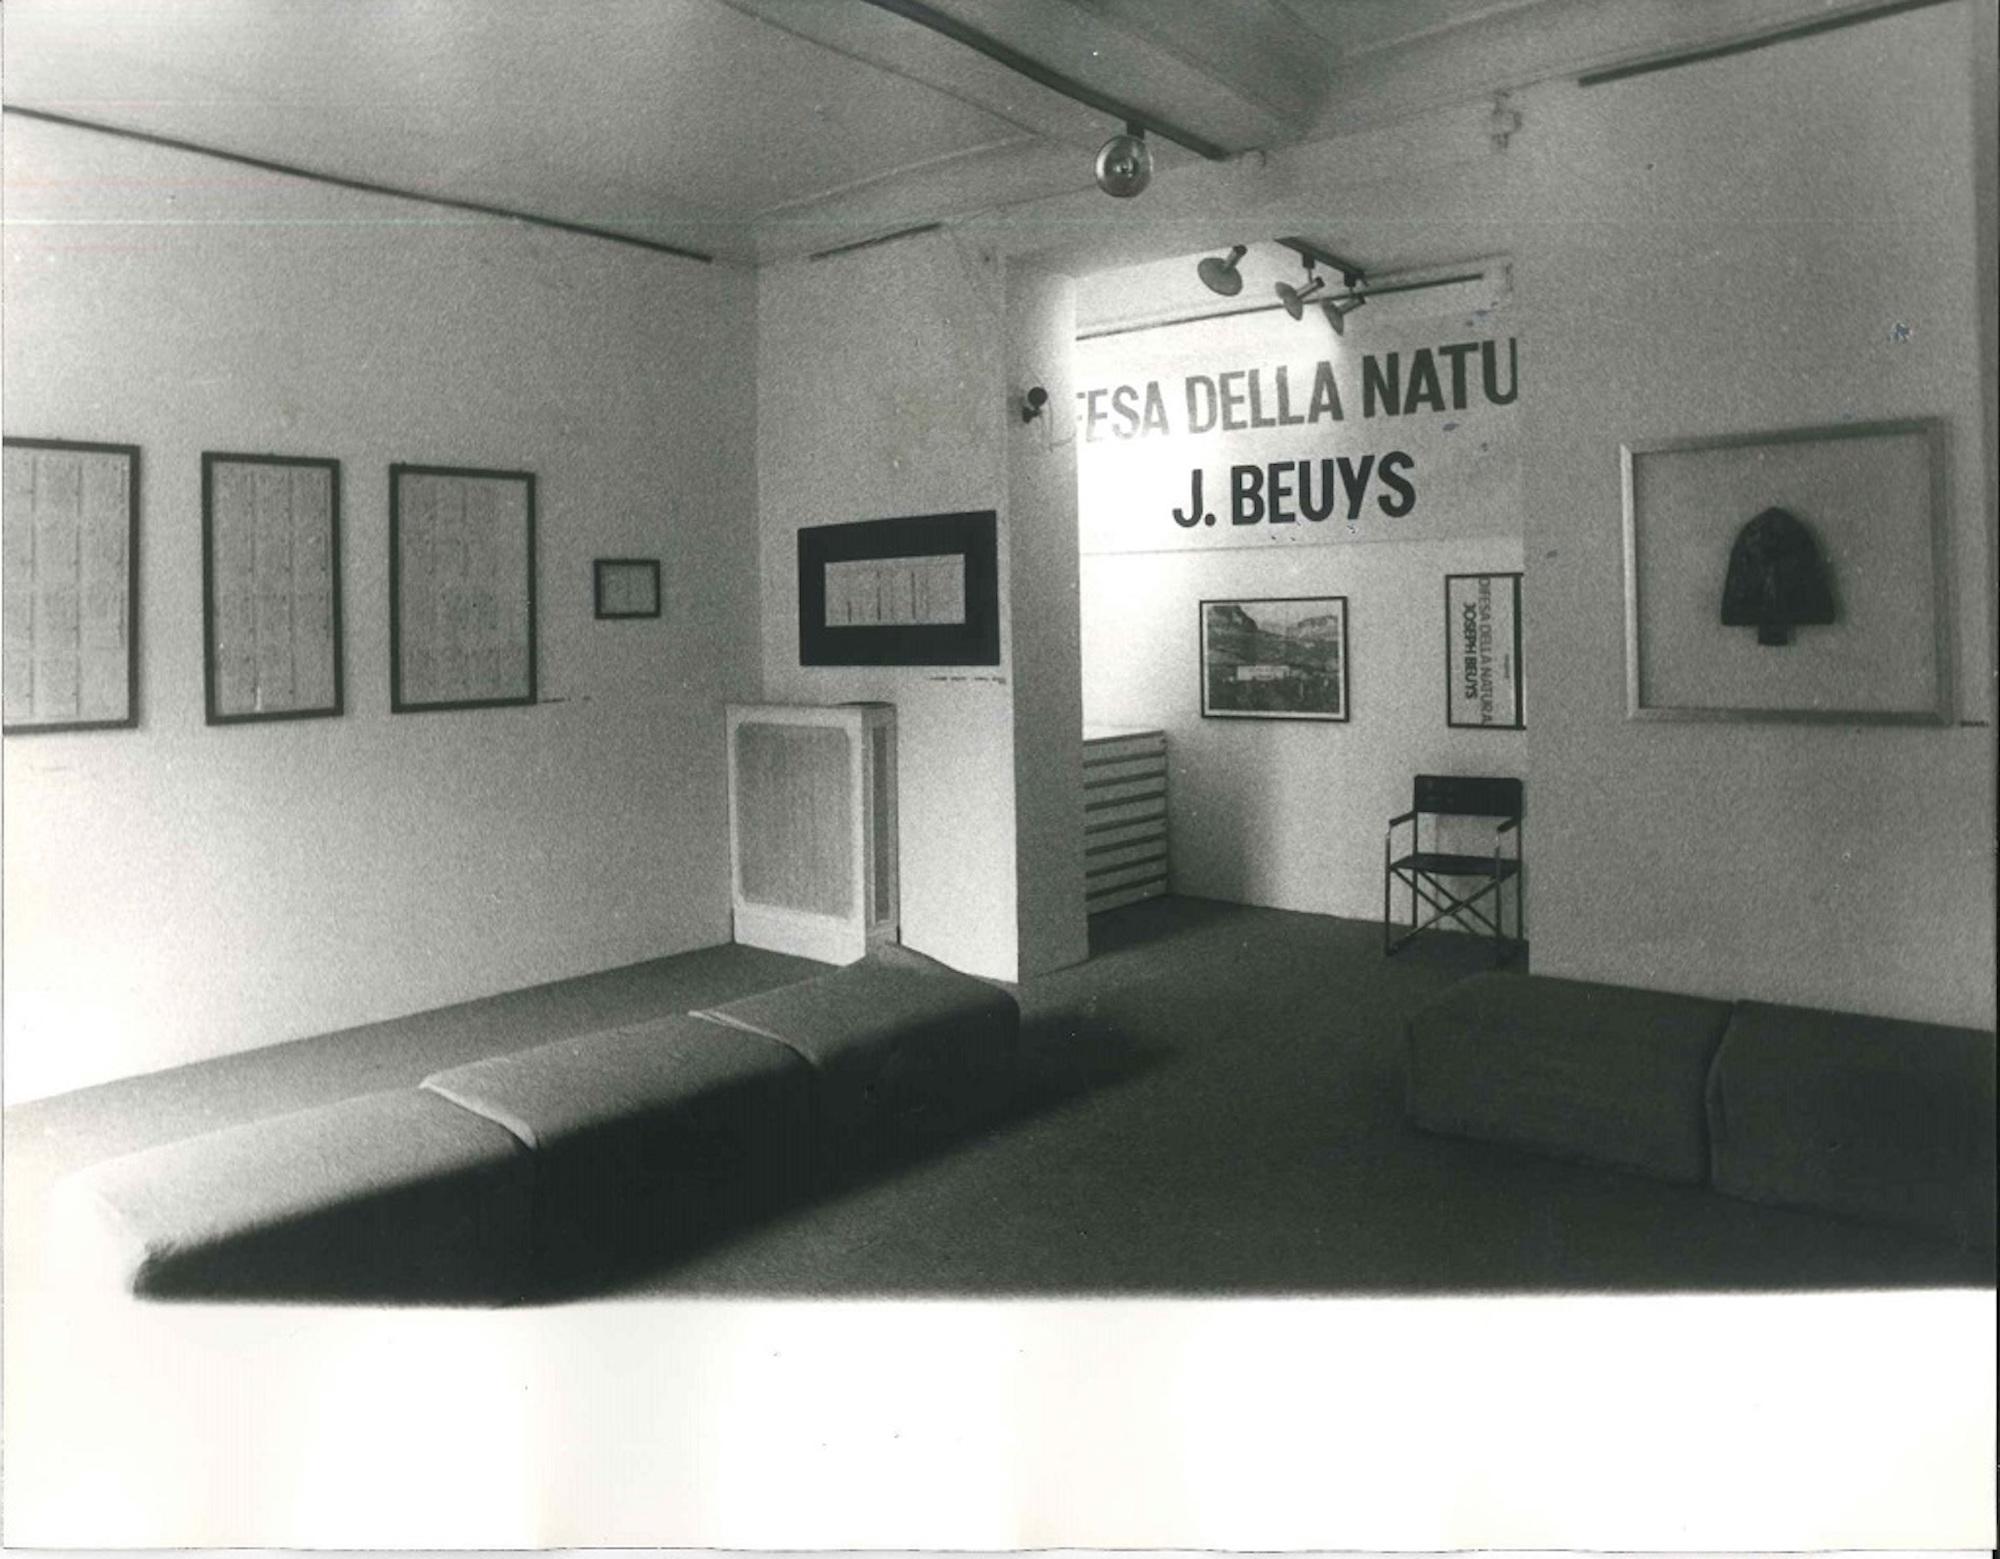 Joseph Beuys Black and White Photograph - Beuys' Exhibition - Original Vintage Photo by Ruby Durini - 1084 ca.